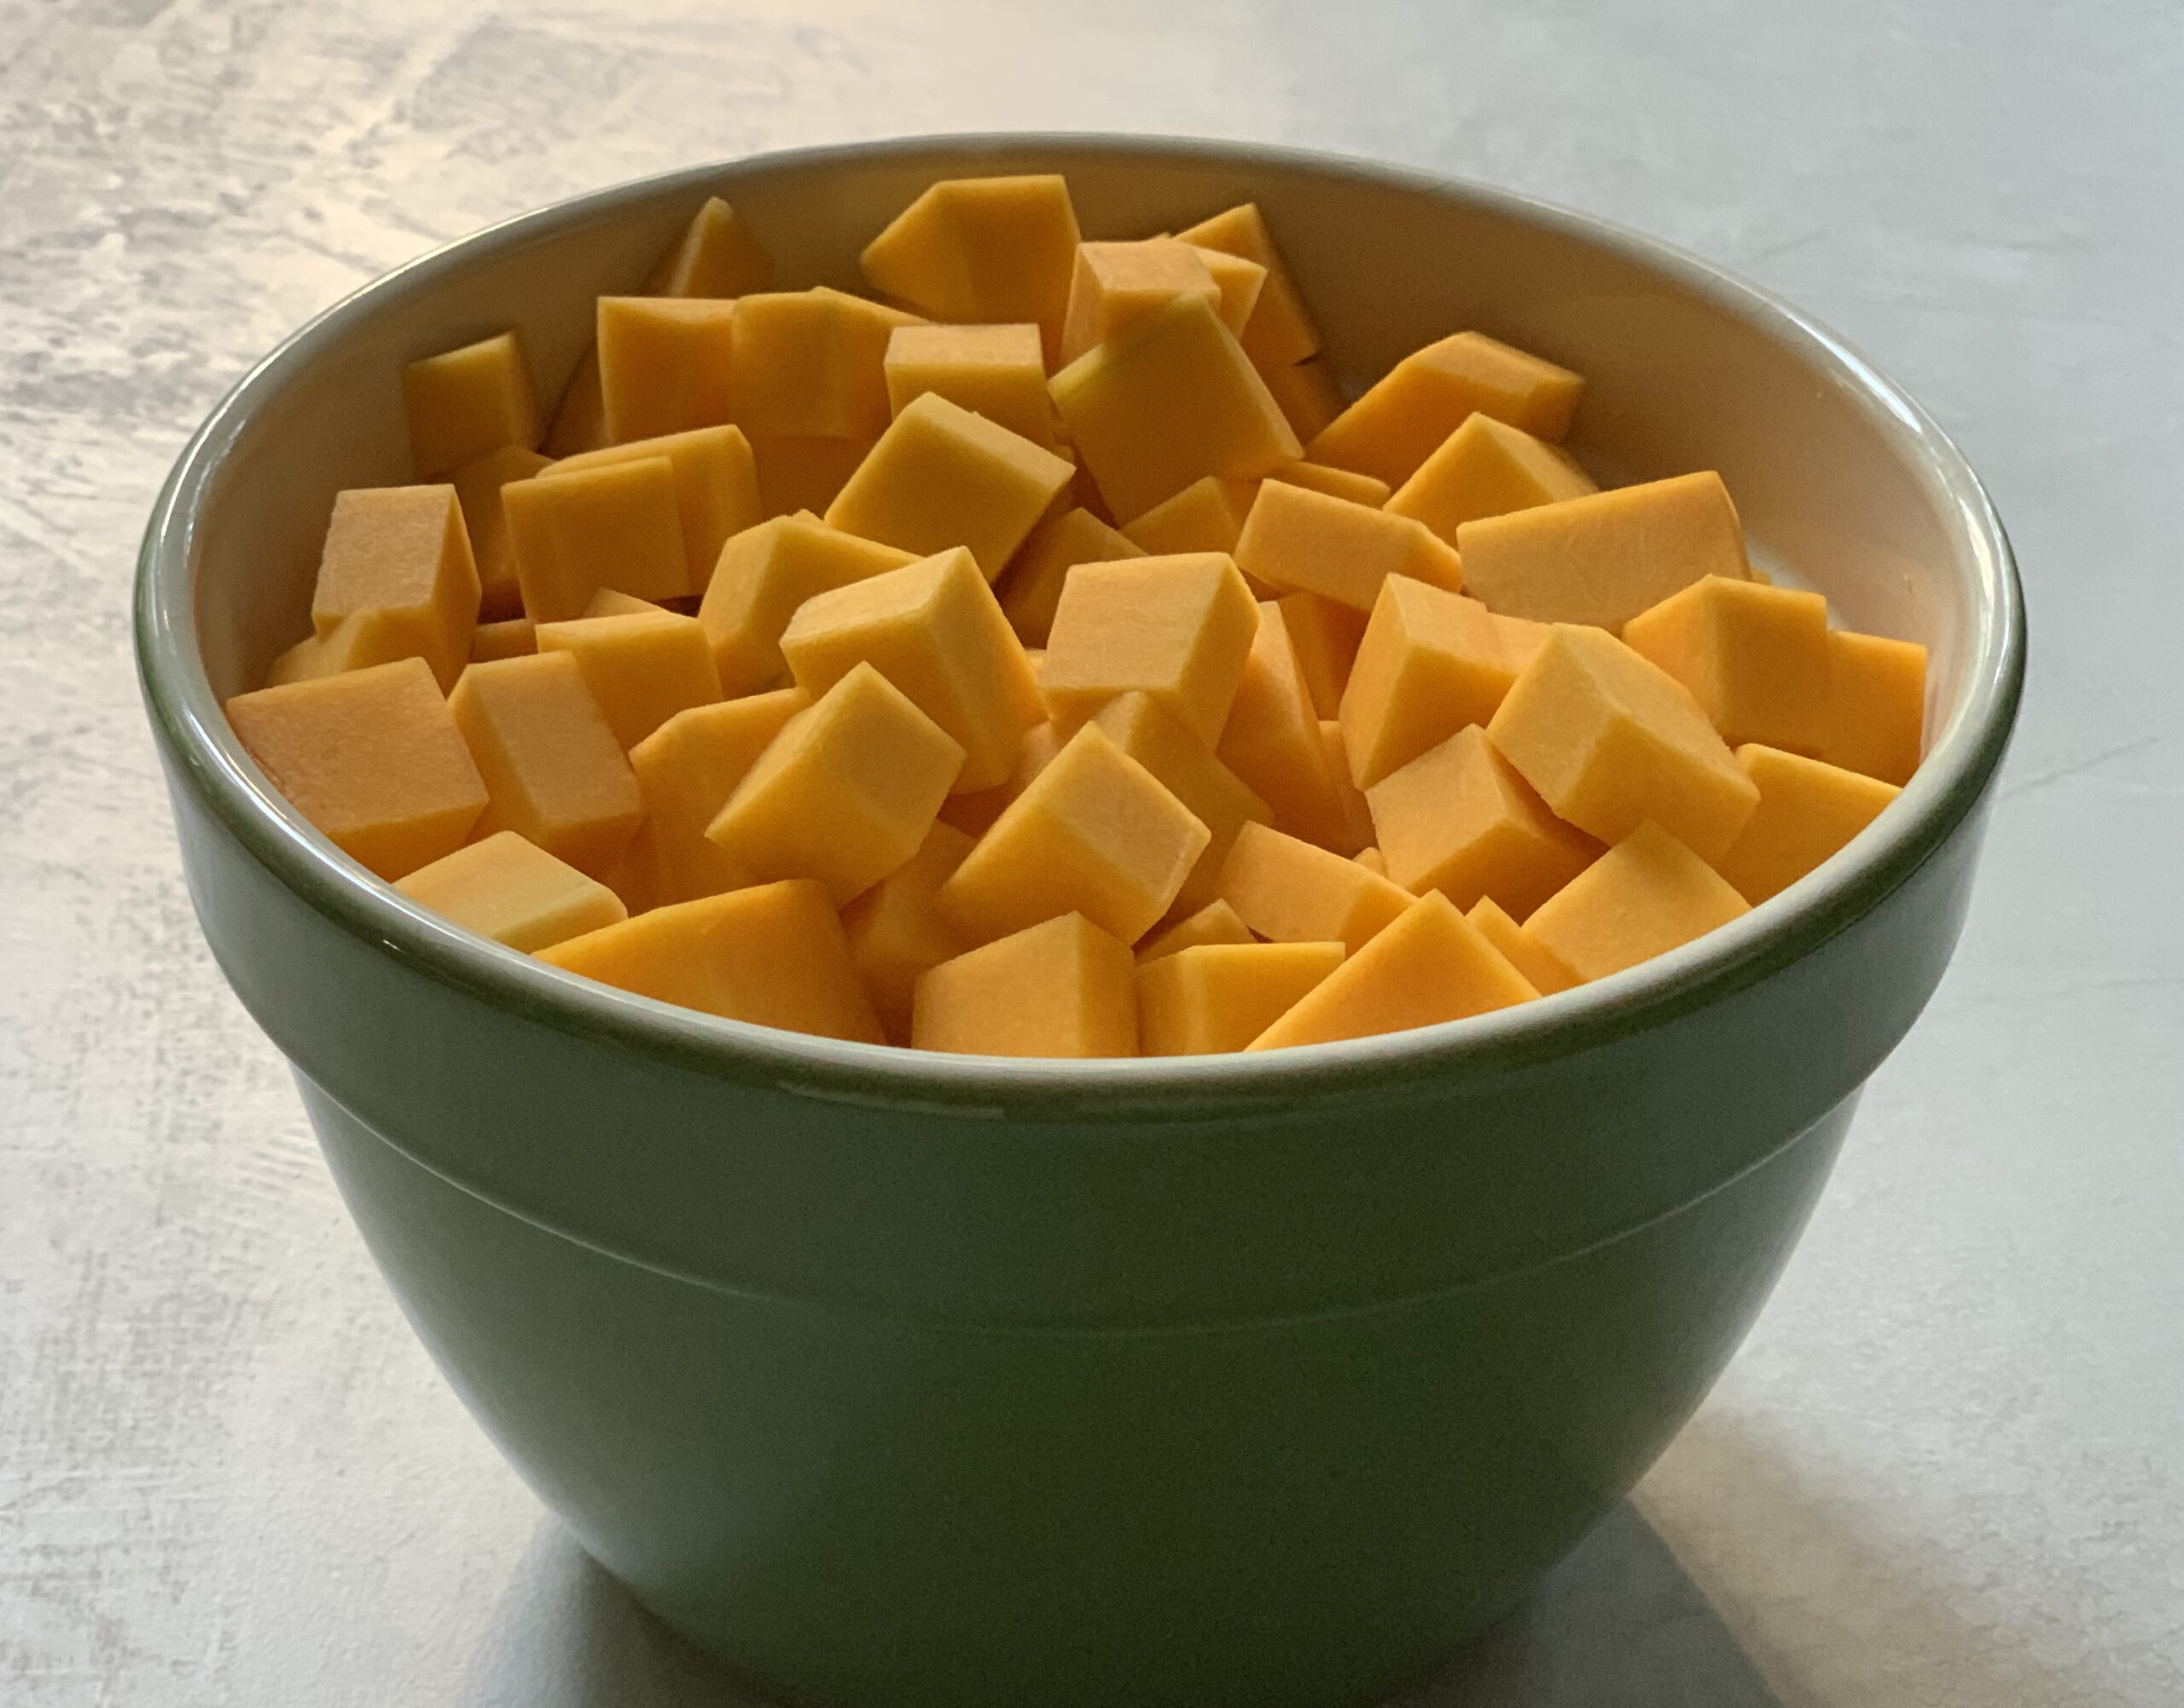 Butternut Squash Cubed and in Bowl